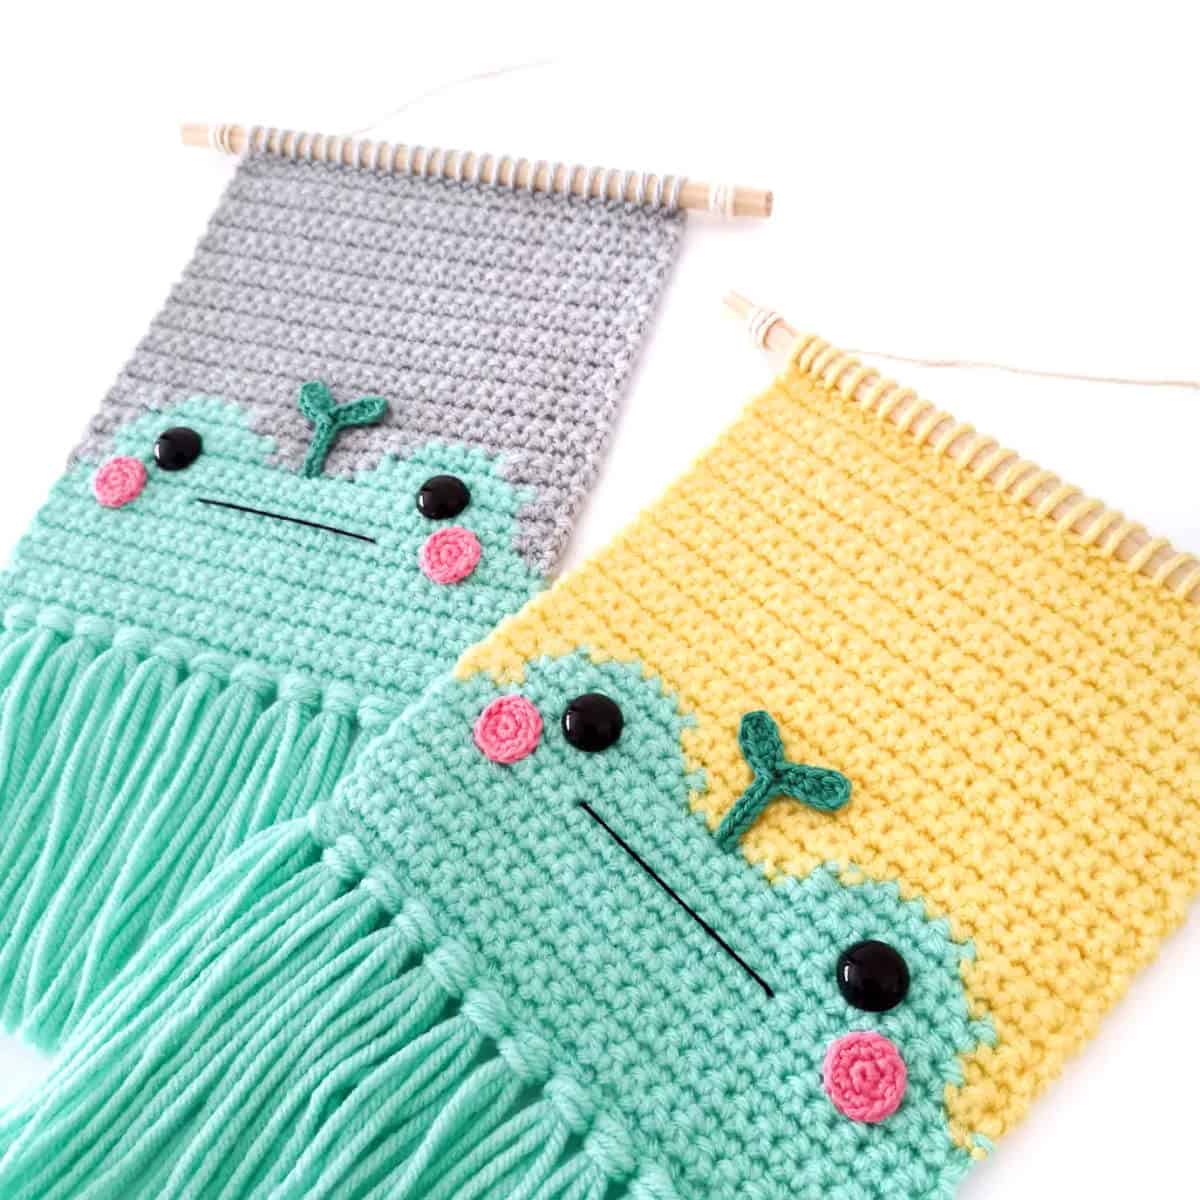 Two crocheted frog wall hangings.